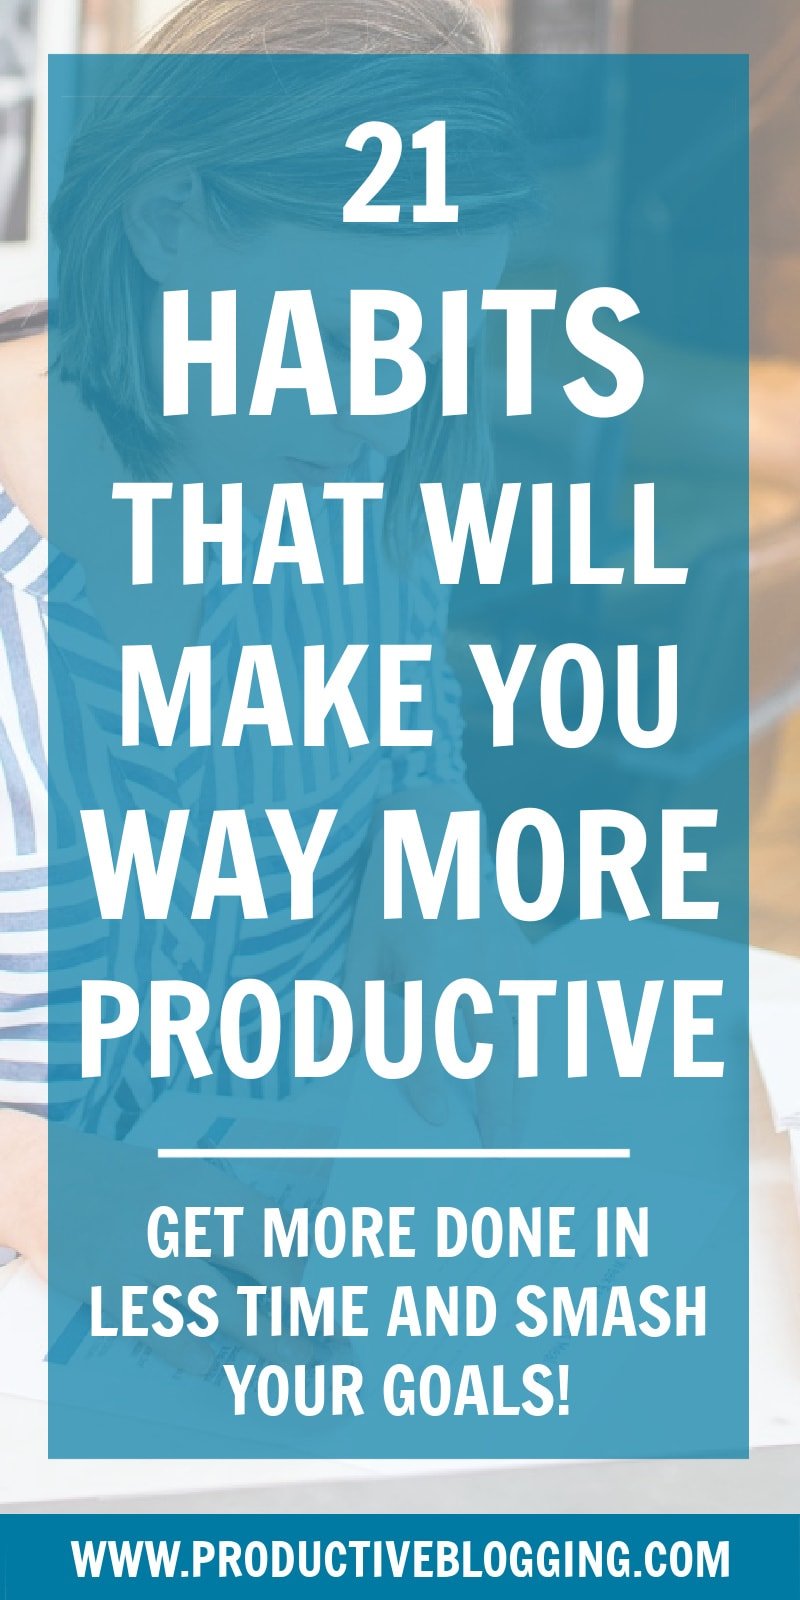 Want to get more done in less time? The best way to turbocharge your productivity is to develop the right habits. Here are 21 habits that will massively boost your productivity. #productivity #productivityhabits #productivityhacks #boostproductivity #todolist #dailytodos #dailyplanning #planning #googlecalendar #timemanagement #goals #blogginggoals #blog #blogging #blogger #bloggingtips #organised #organized #productivitytips #productiveblogging #blogsmarternotharder #worksmarternotharder